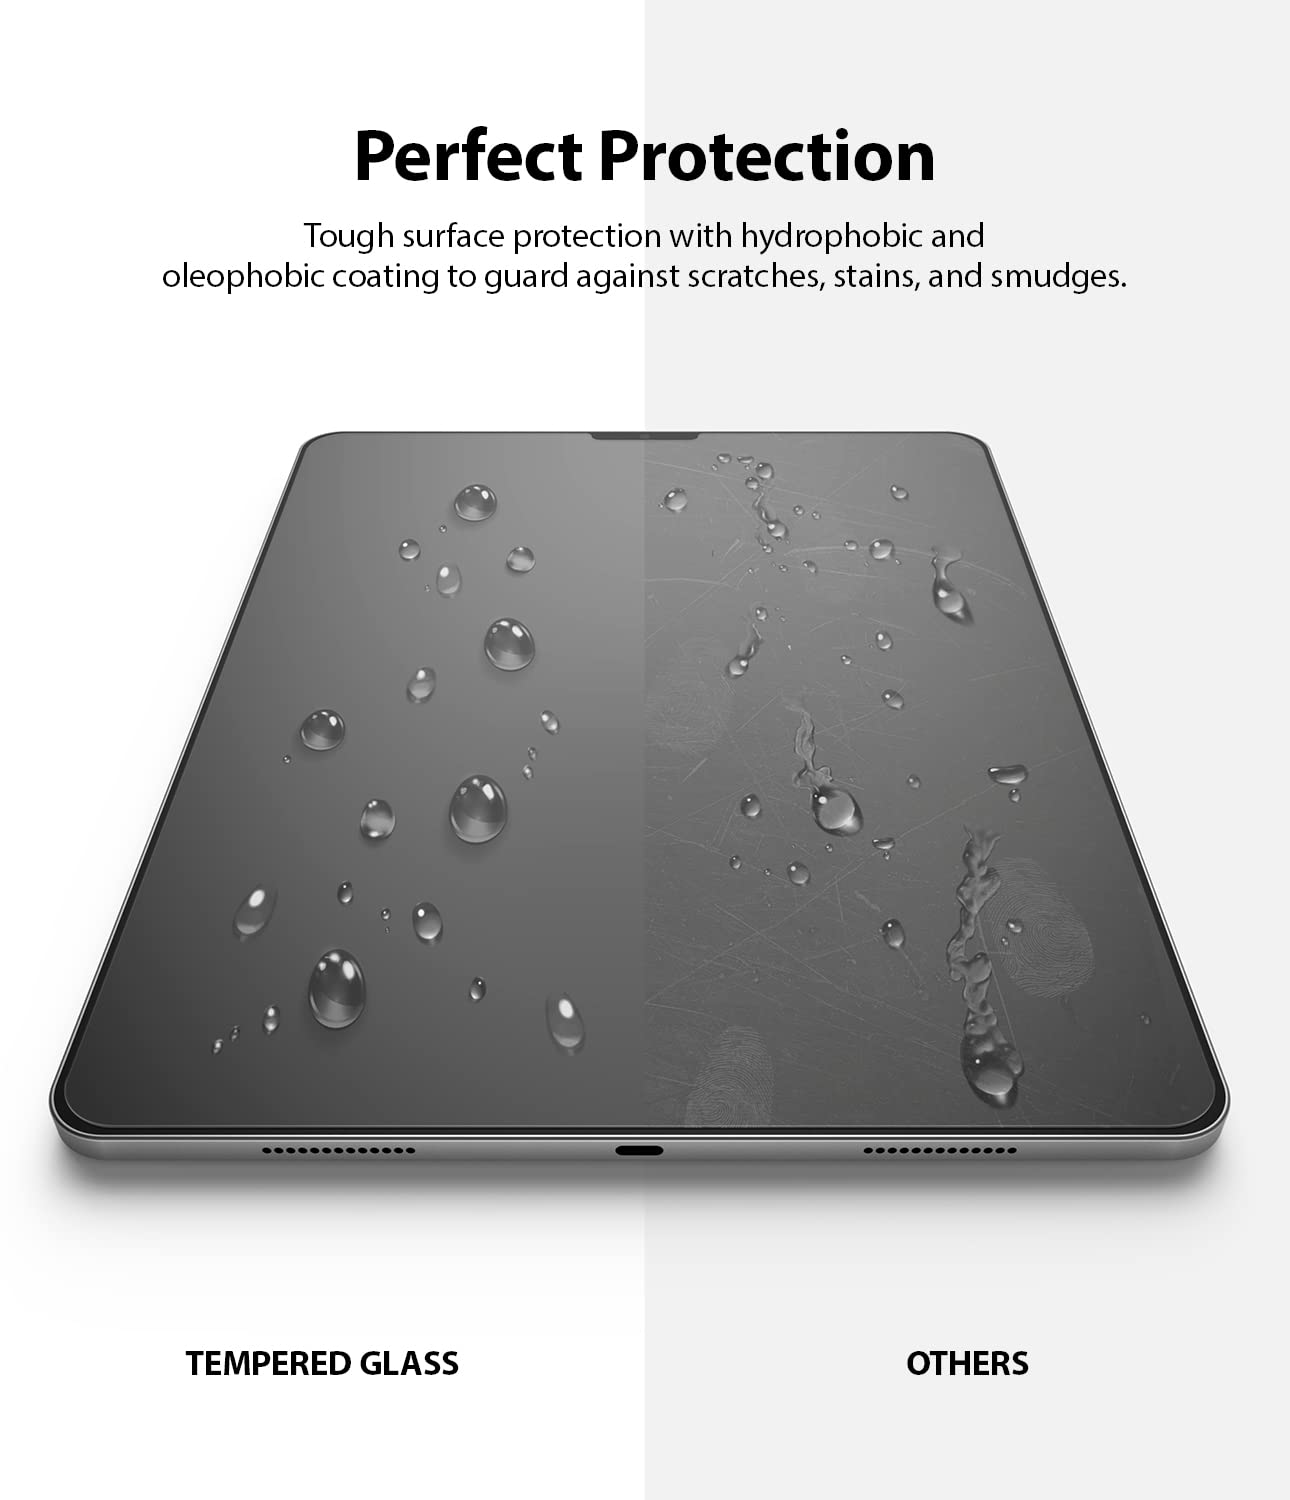 PET Screen Protector Guard Protective Clear Film For iPad Pro 12.9